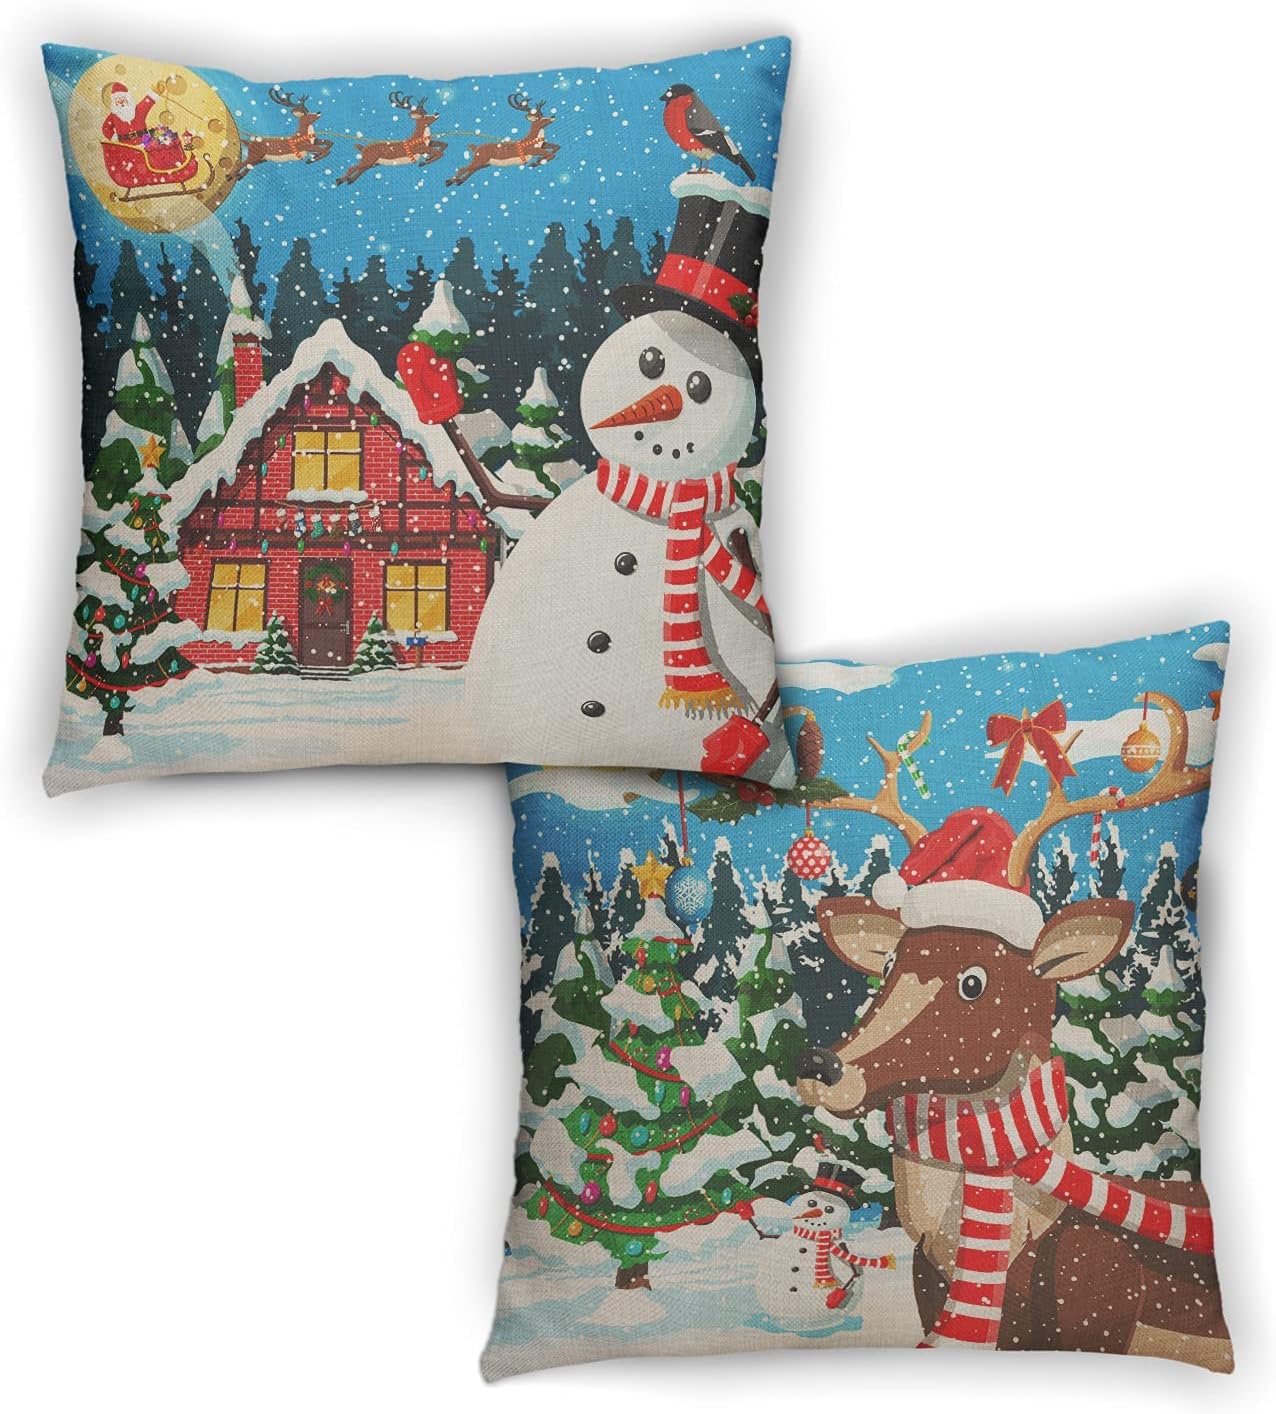 ABSOP Merry Christmas Pillow Covers 18x18 Inches Set of 2 Vintage Farmhouse Christmas Pillowcase Snowman Pillows Decorative Throw Pillows Winter Holiday Xmas Cushion Covers for Sofa Couch Home Decor